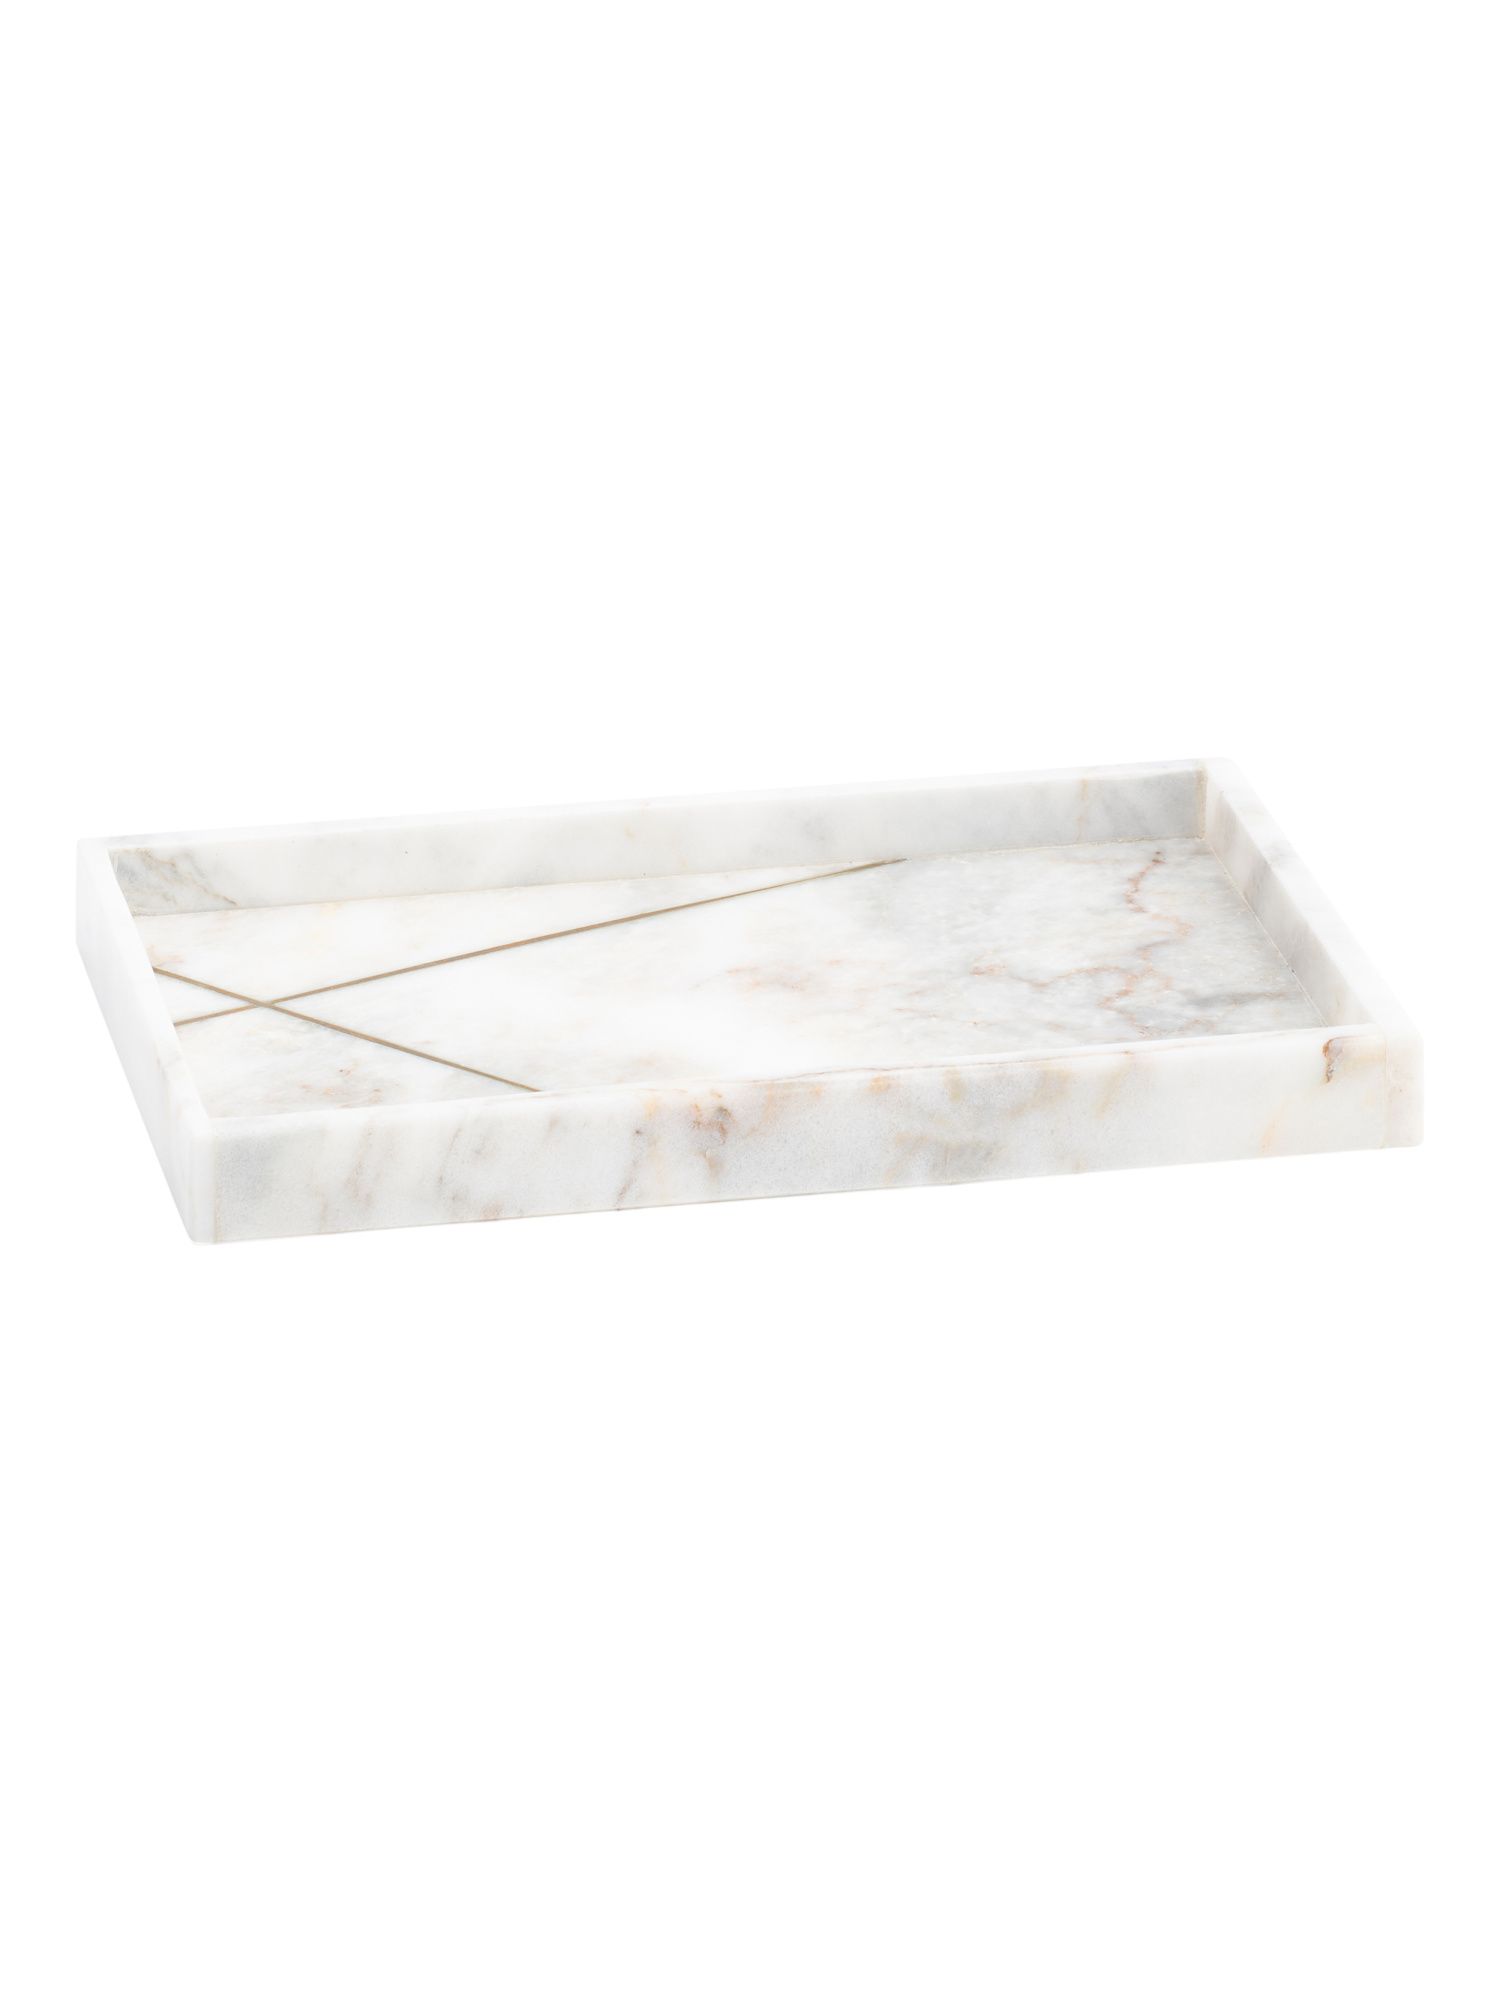 12x8in Marble Brass Inly Detail Tray | TJ Maxx